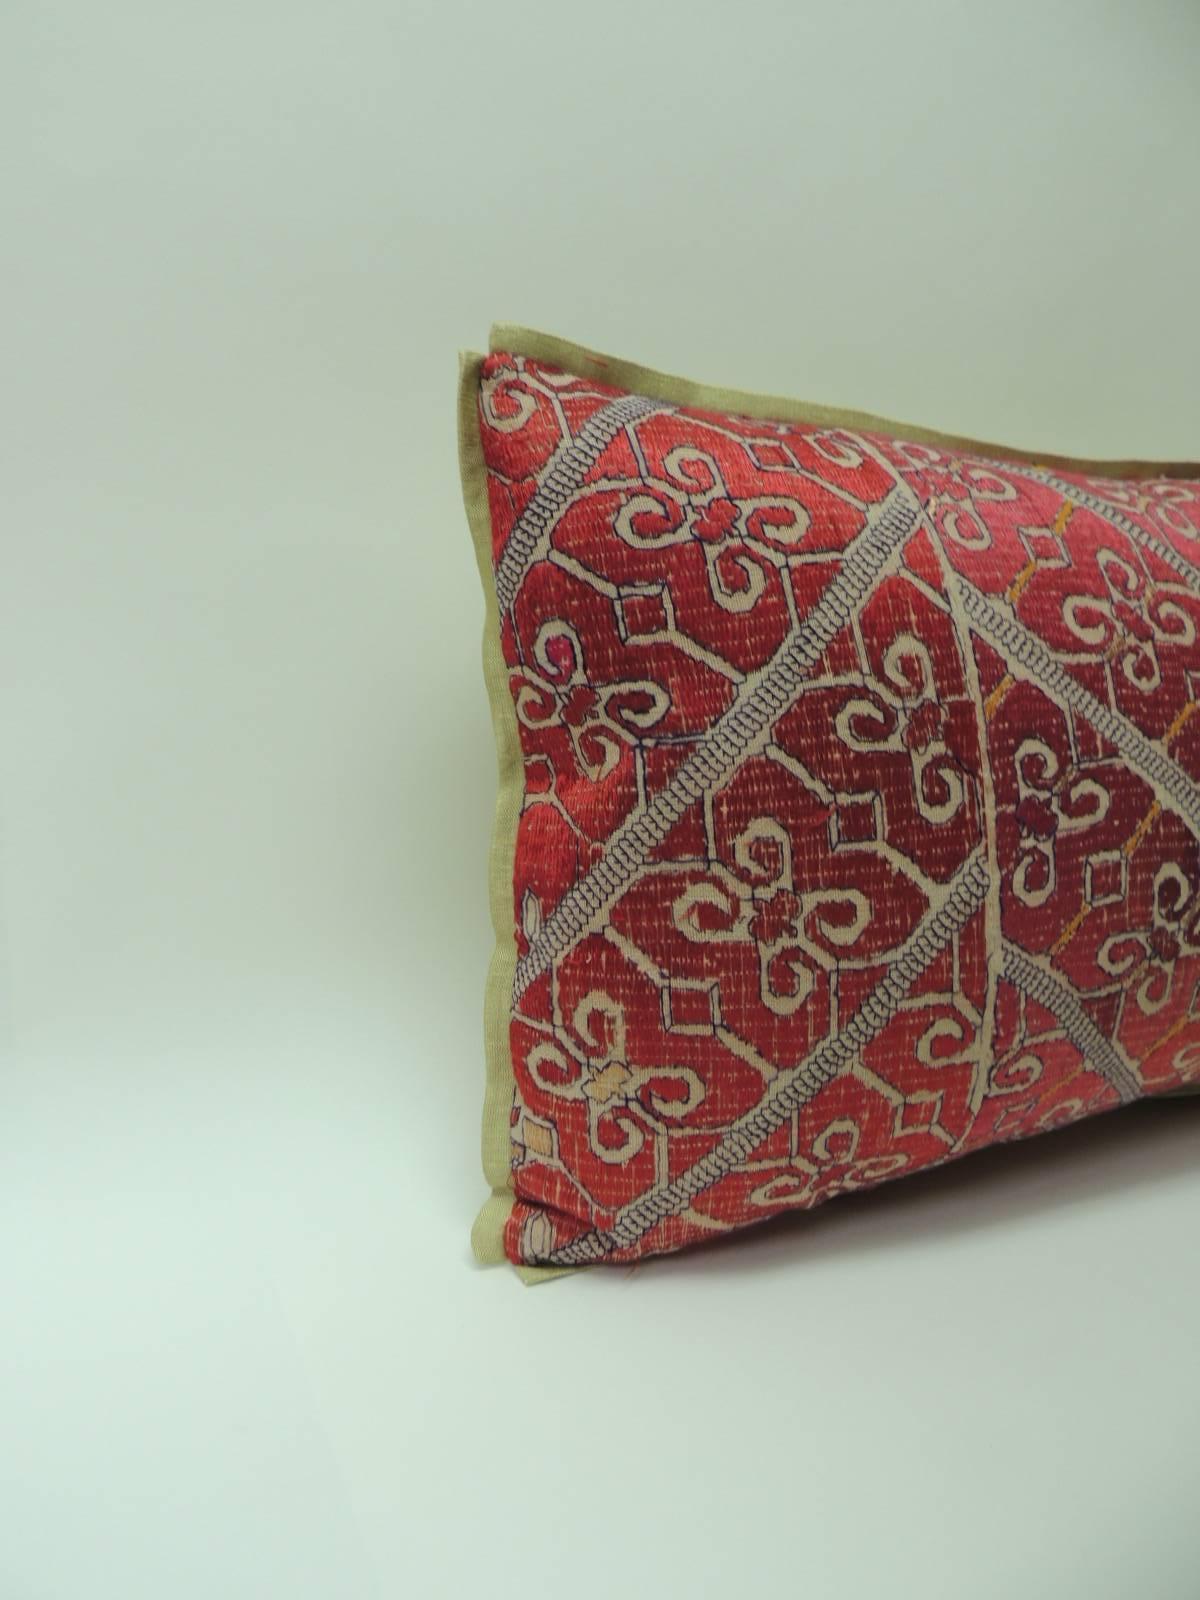 Large 19th century Moroccan embroidered bolster pillows with traditional floral design, floss silk threads in shades of red and green in a chevron pattern. Golden silk  backing same as custom ATG silk golden flat trim.  Decorative pillows hand-made